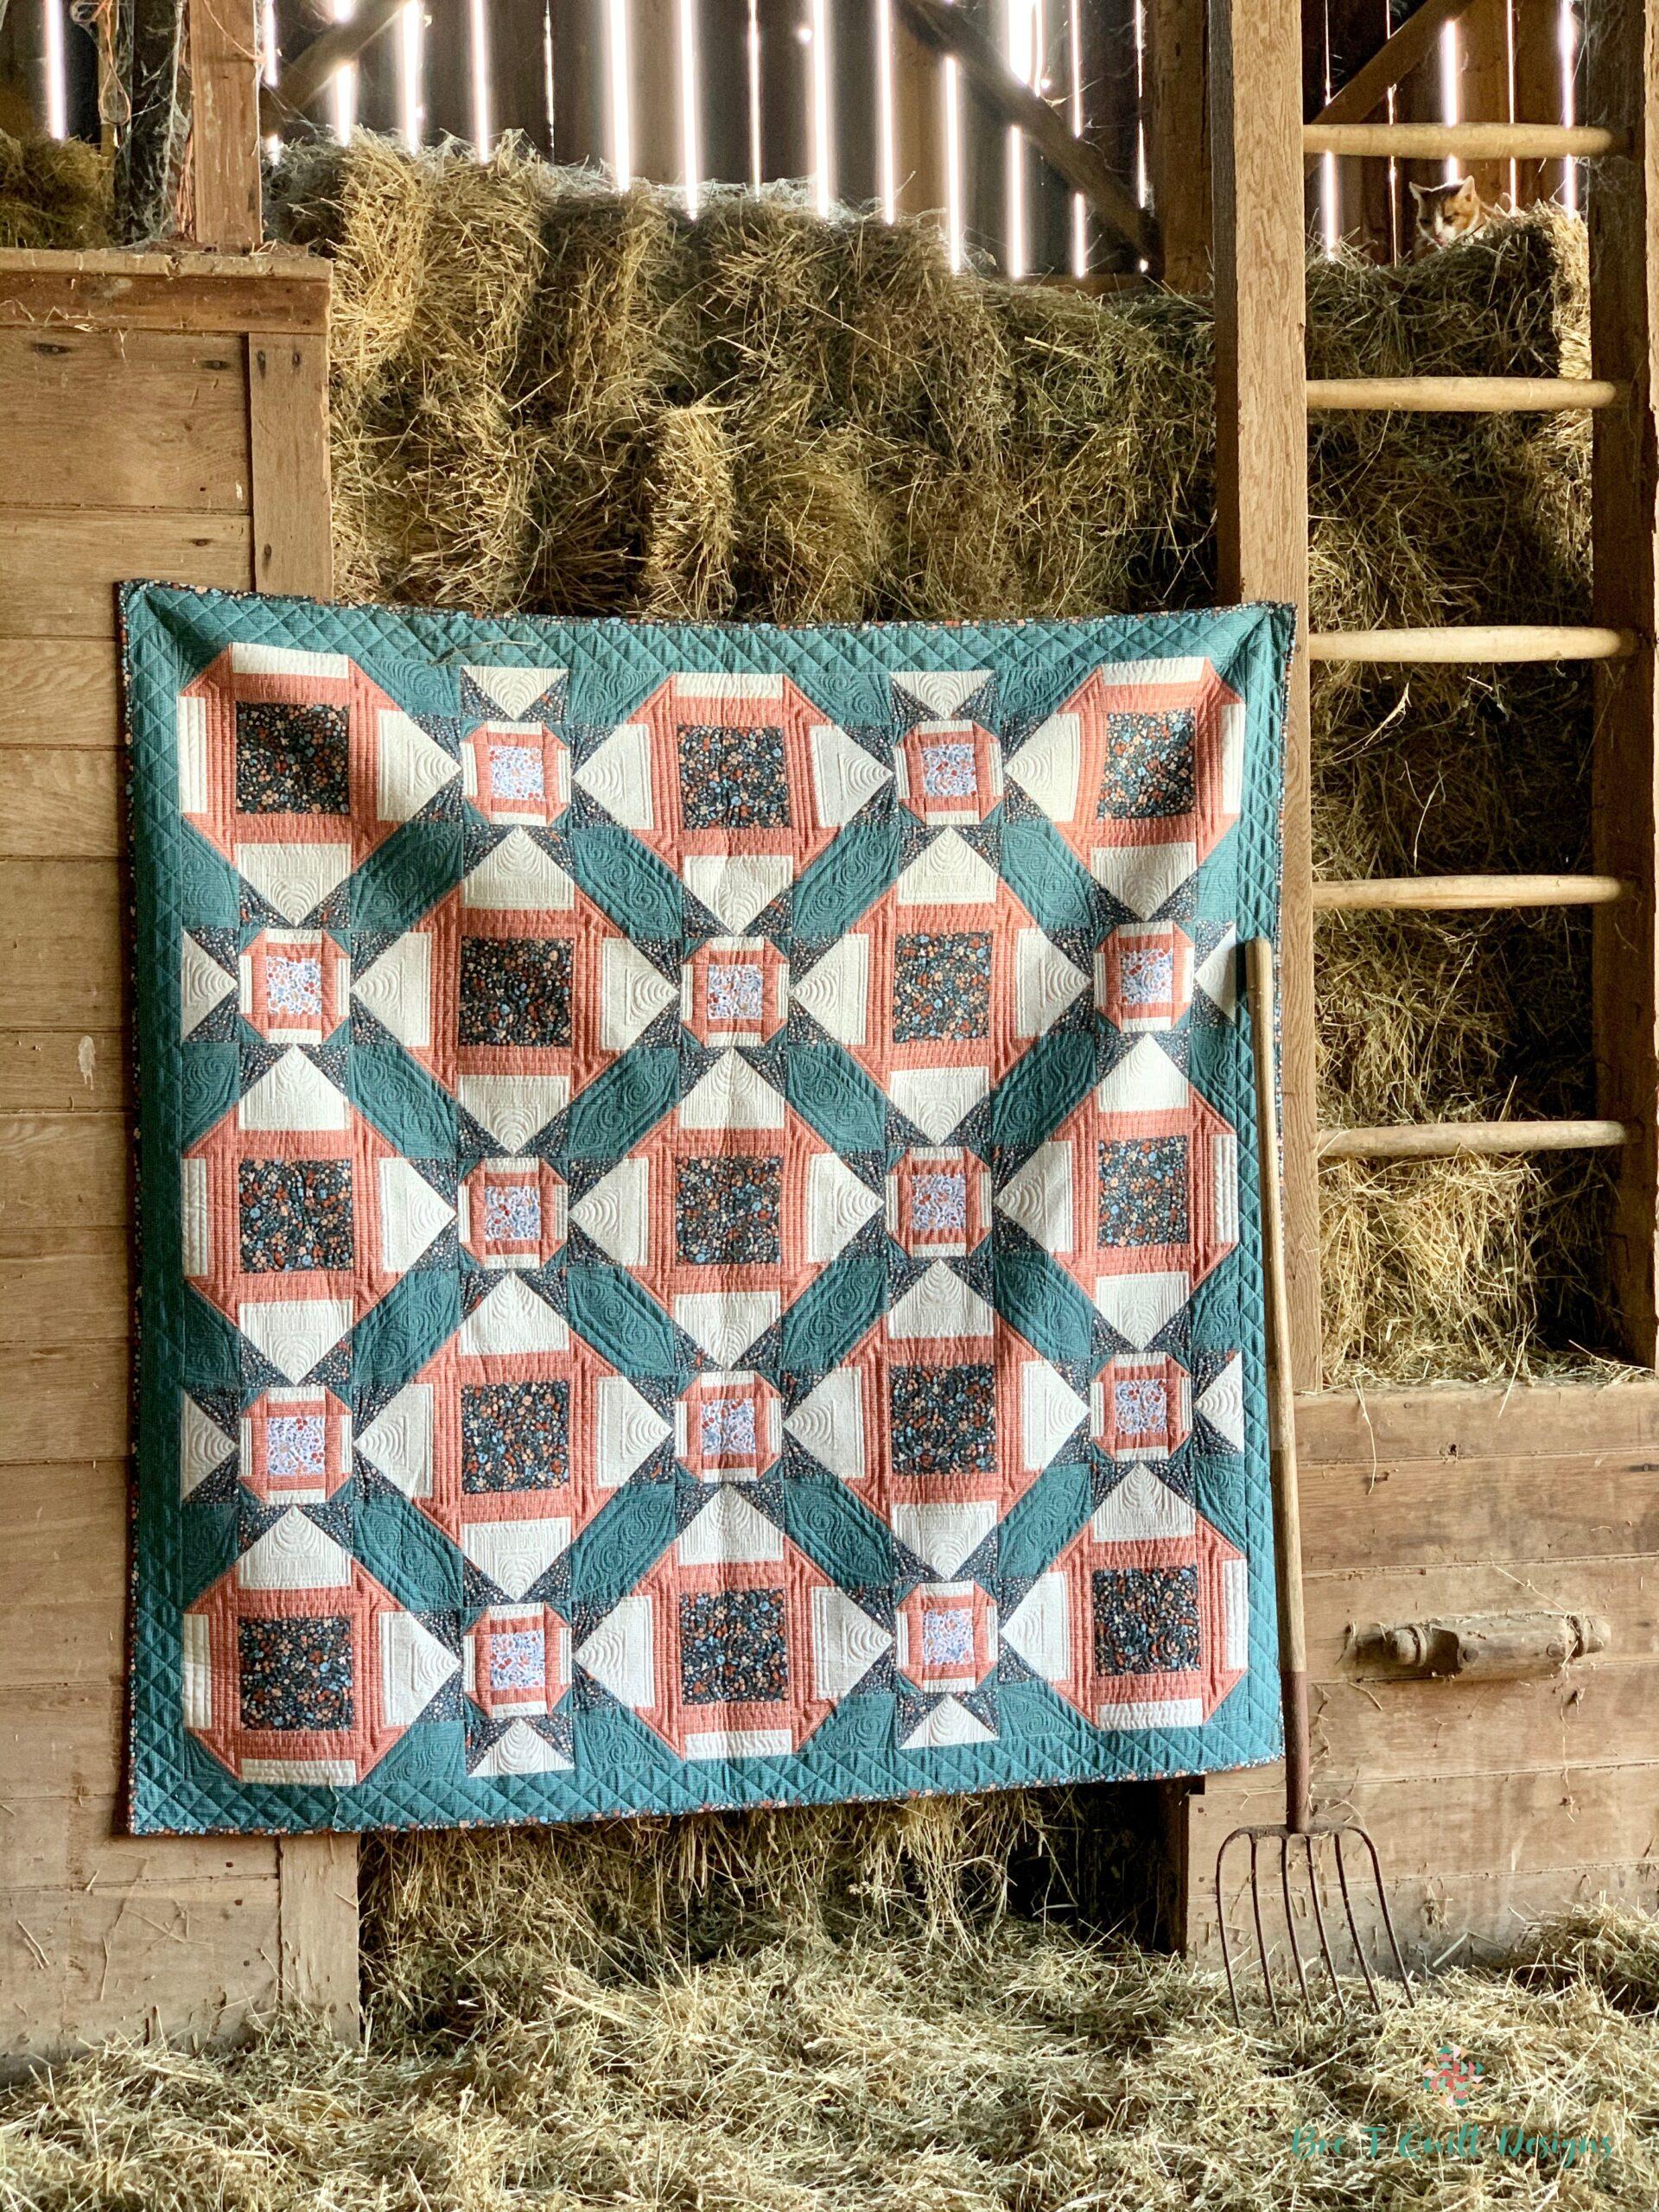 Country Churn Quilt Pattern Hanging In Hay Mow